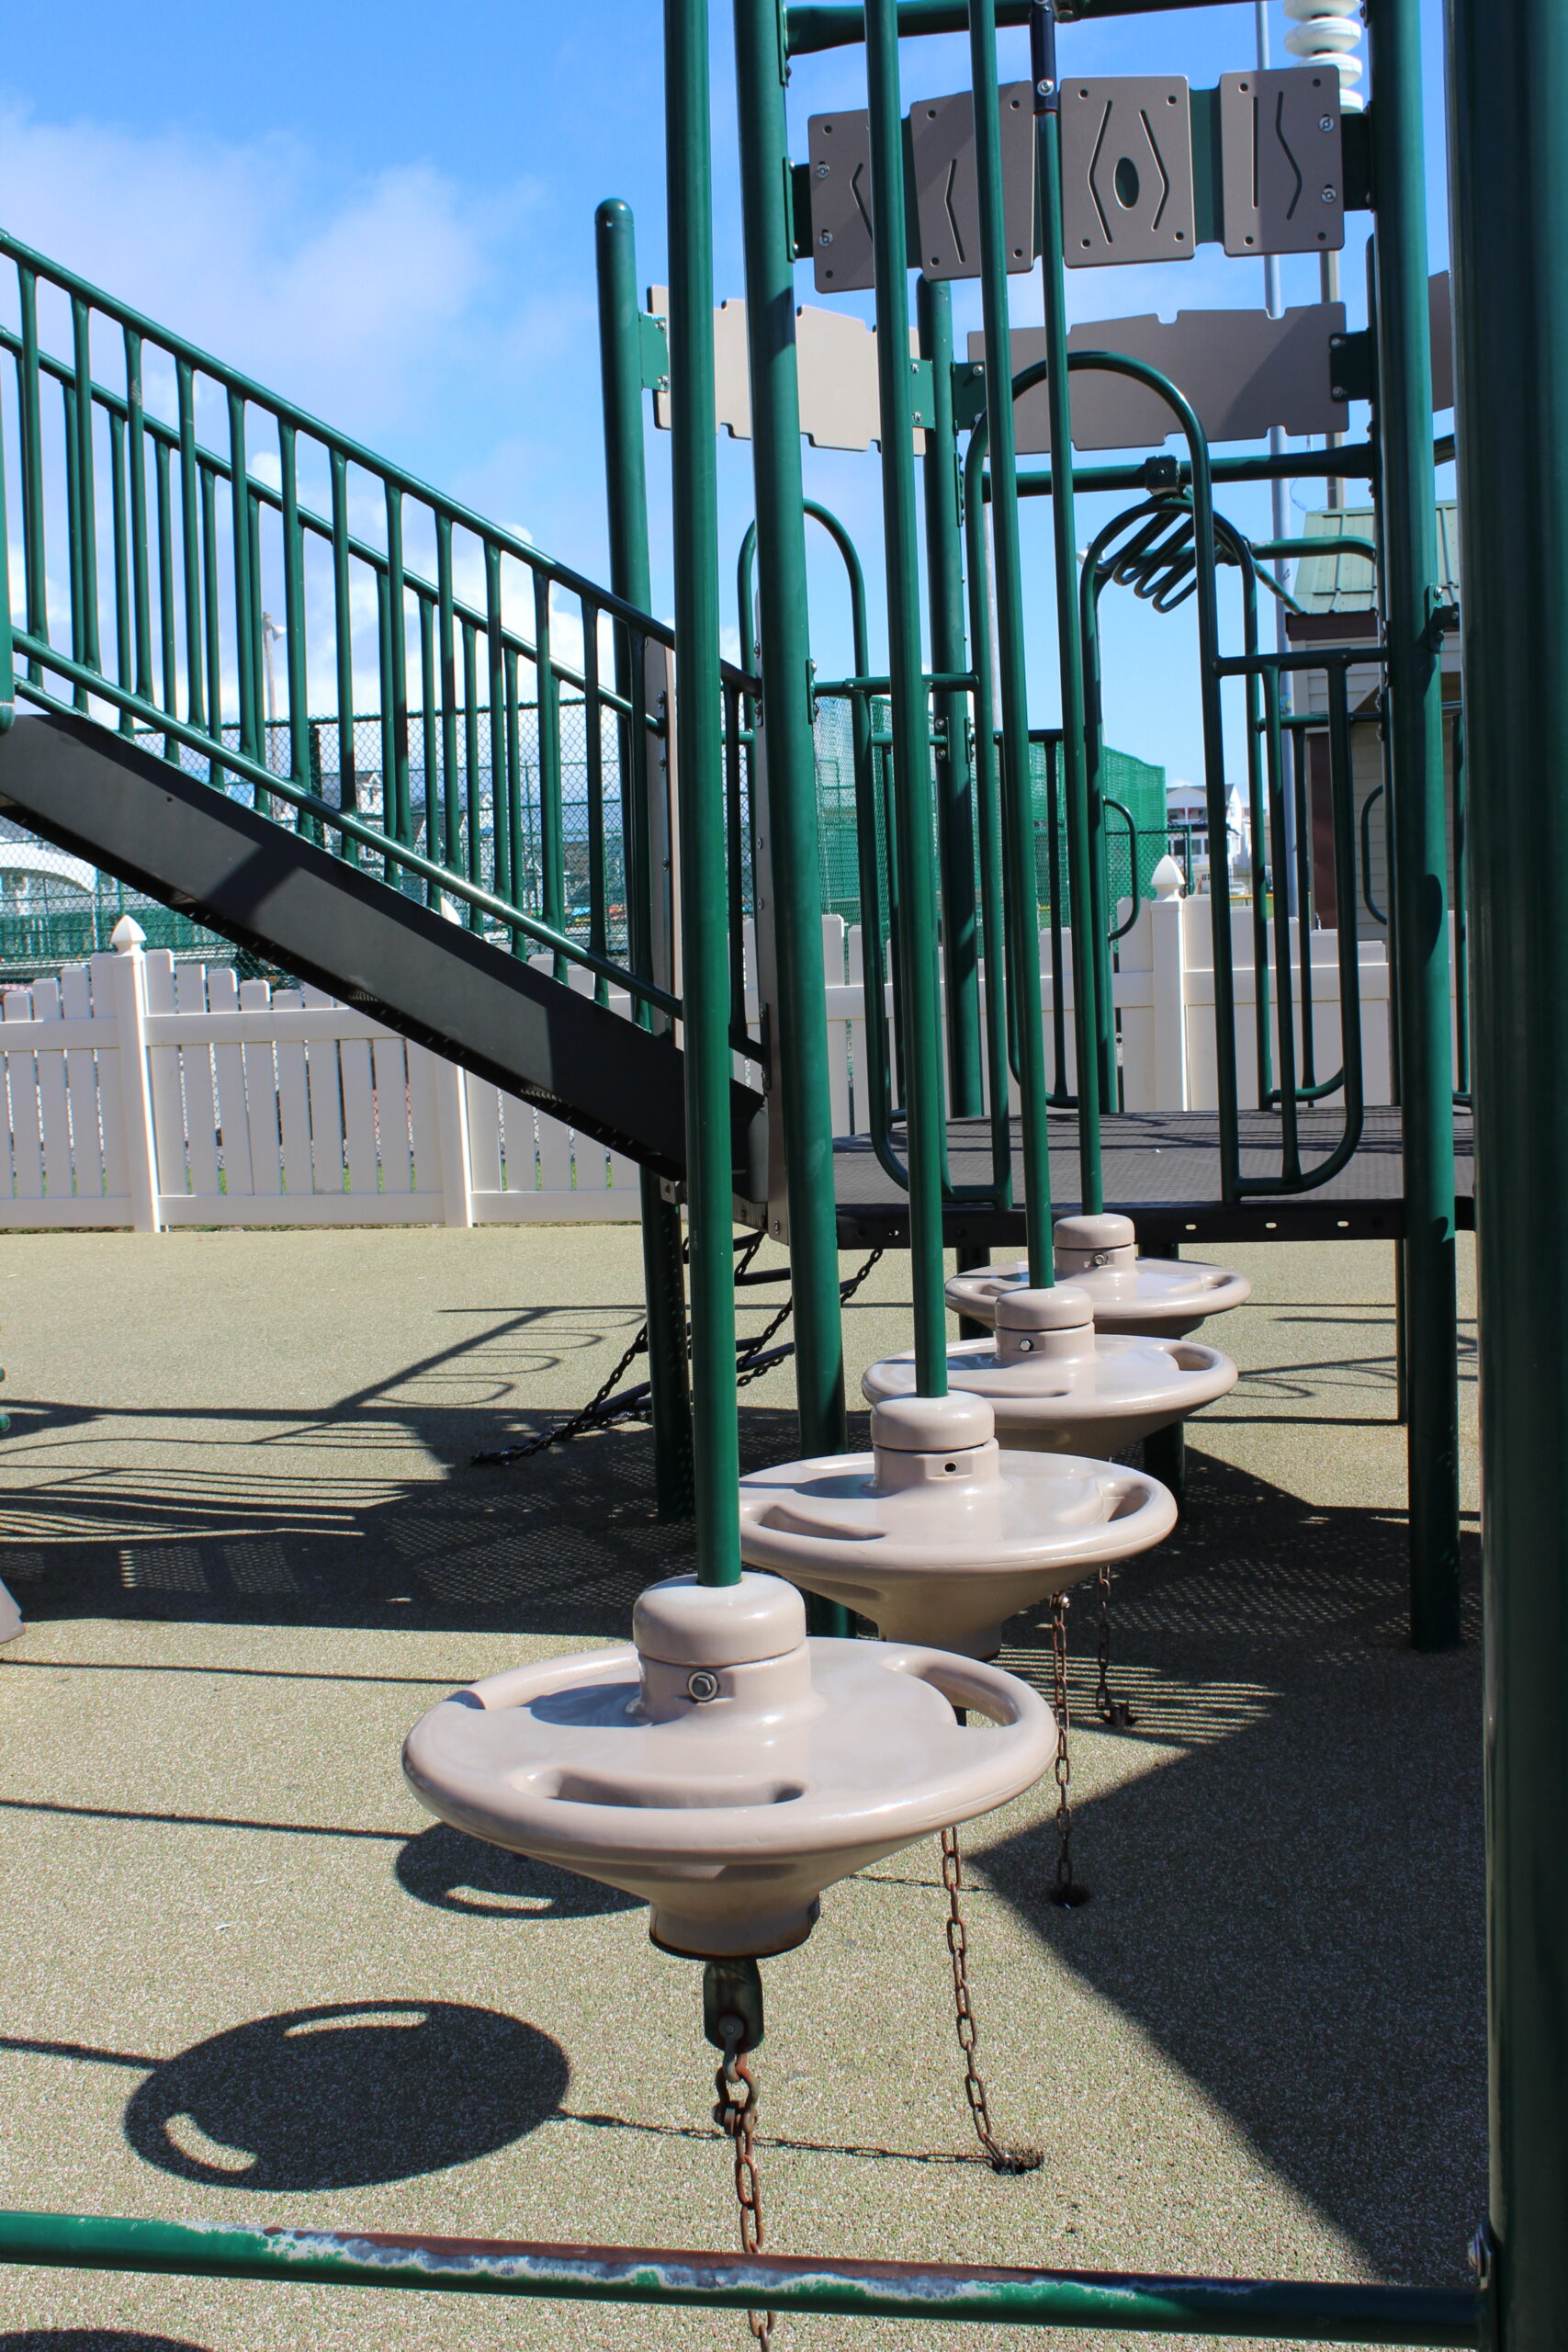 Dealy Field Playground in Sea Isle City NJ - Features -bridge with ropes and discs